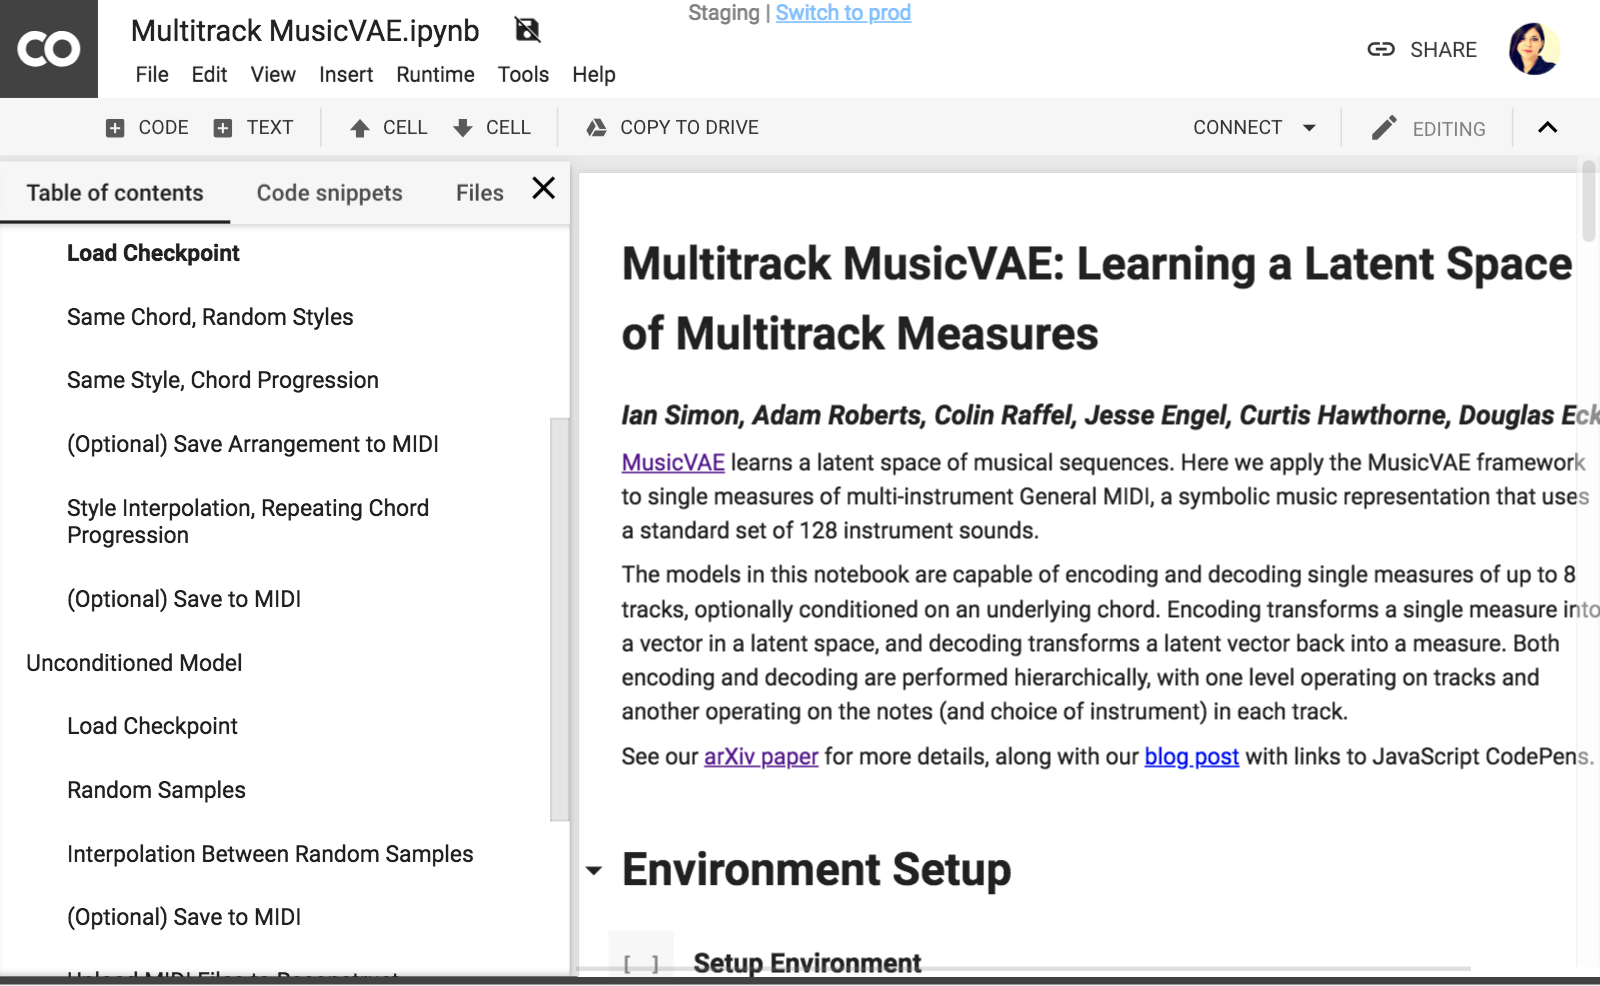 overview of Multitrack MusicVAE